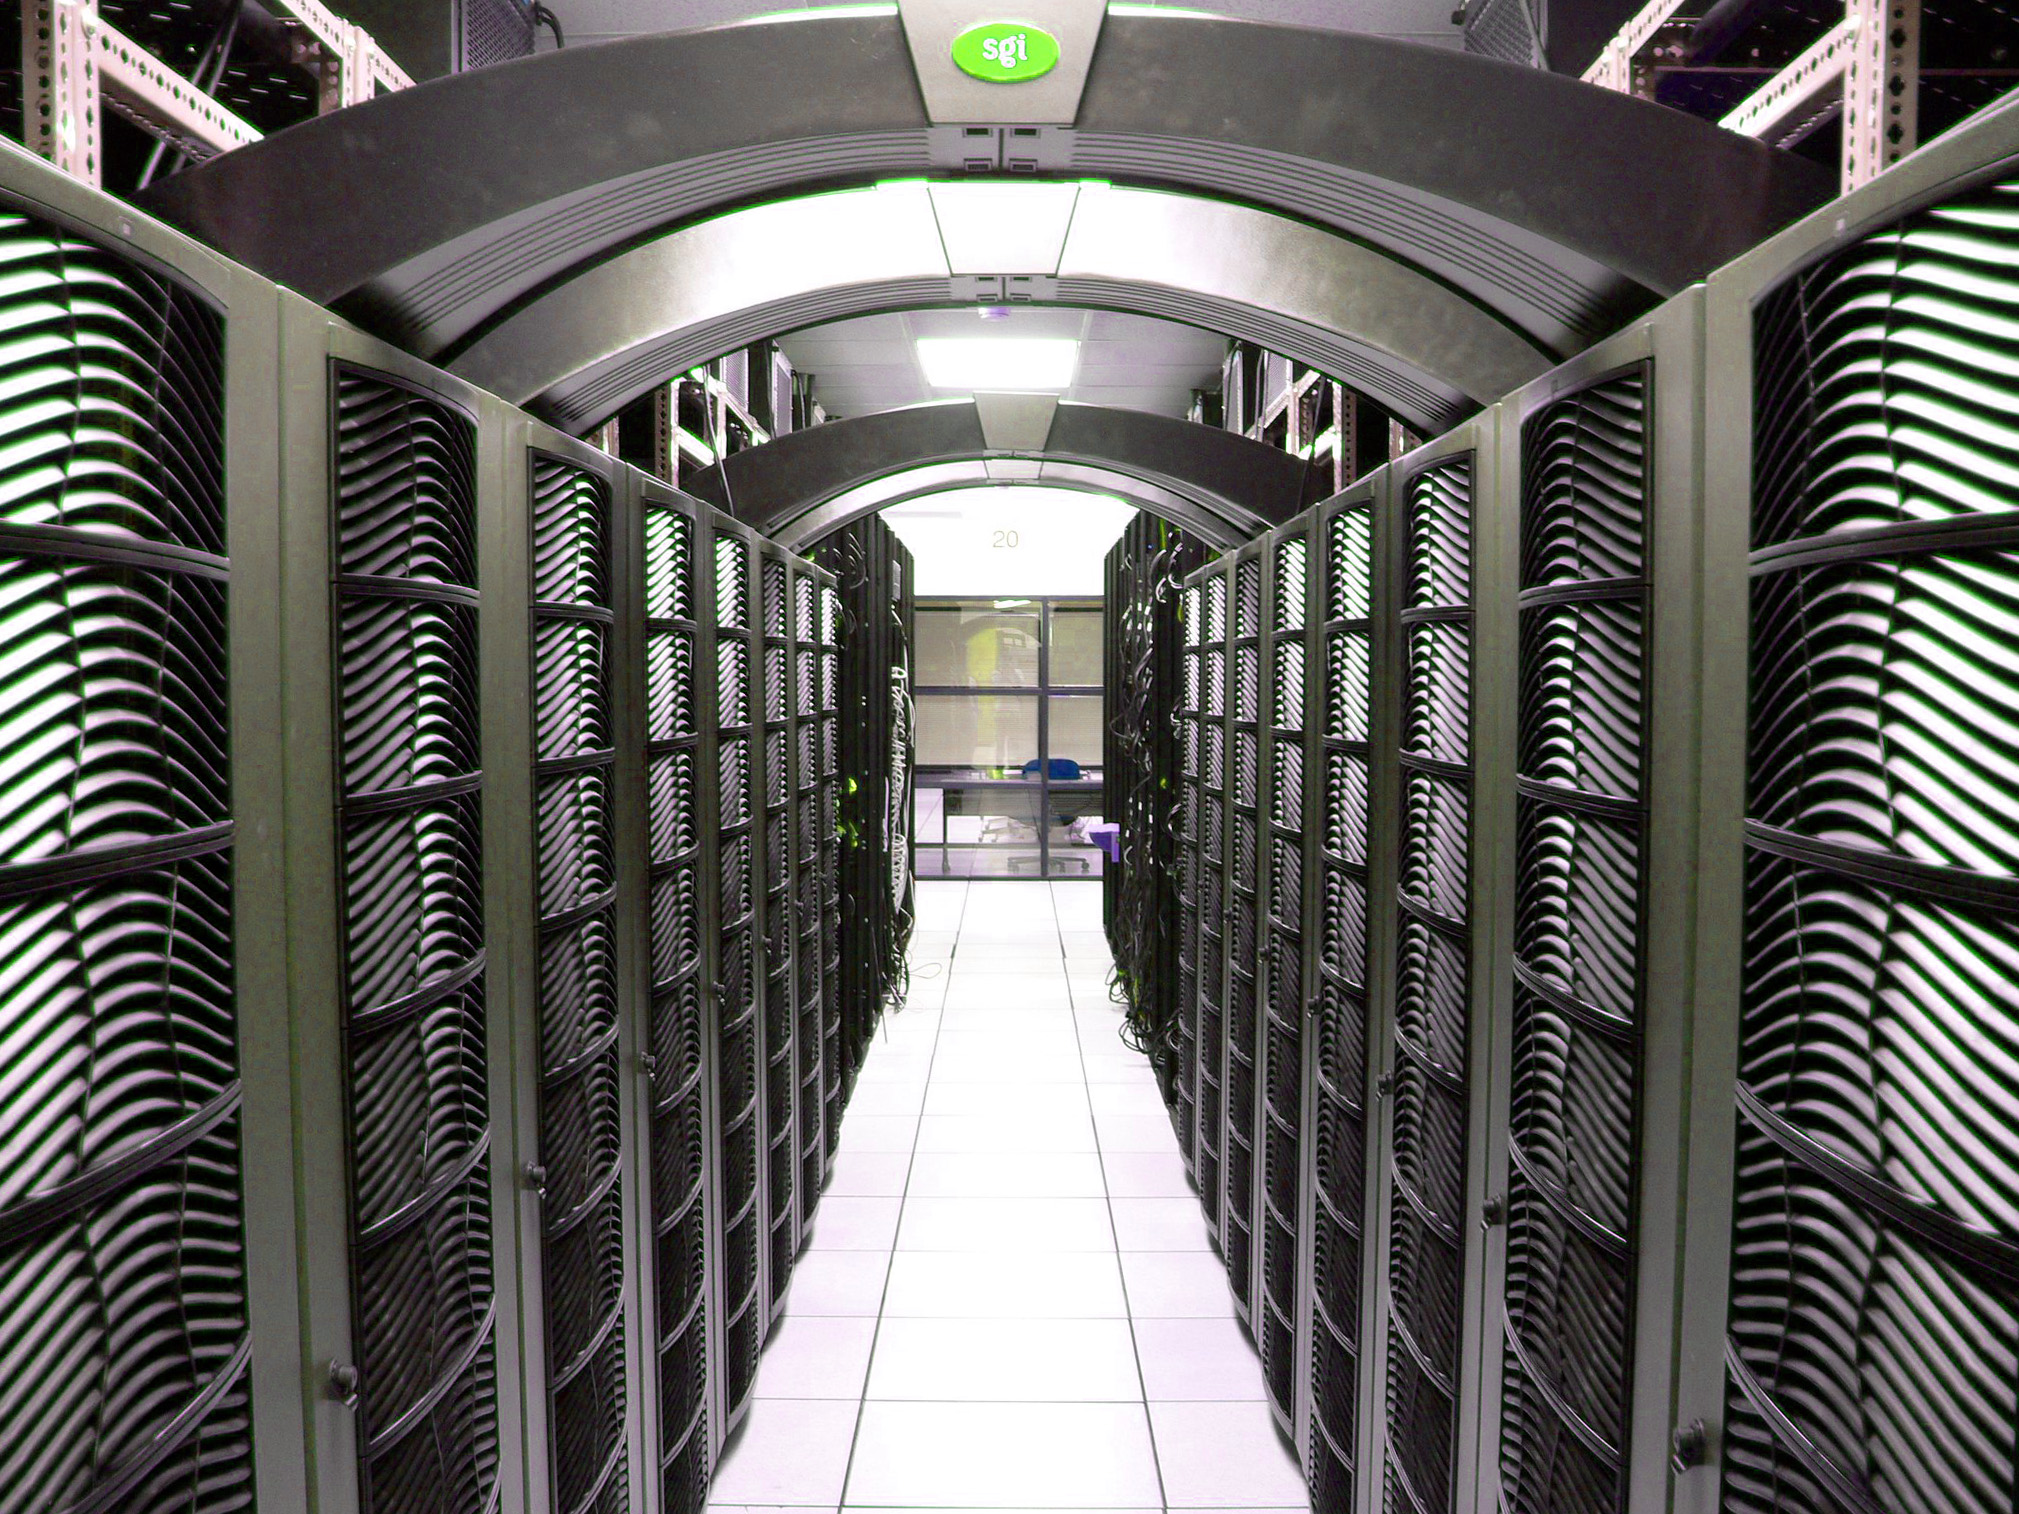 Rows of servers form aisles in a data center